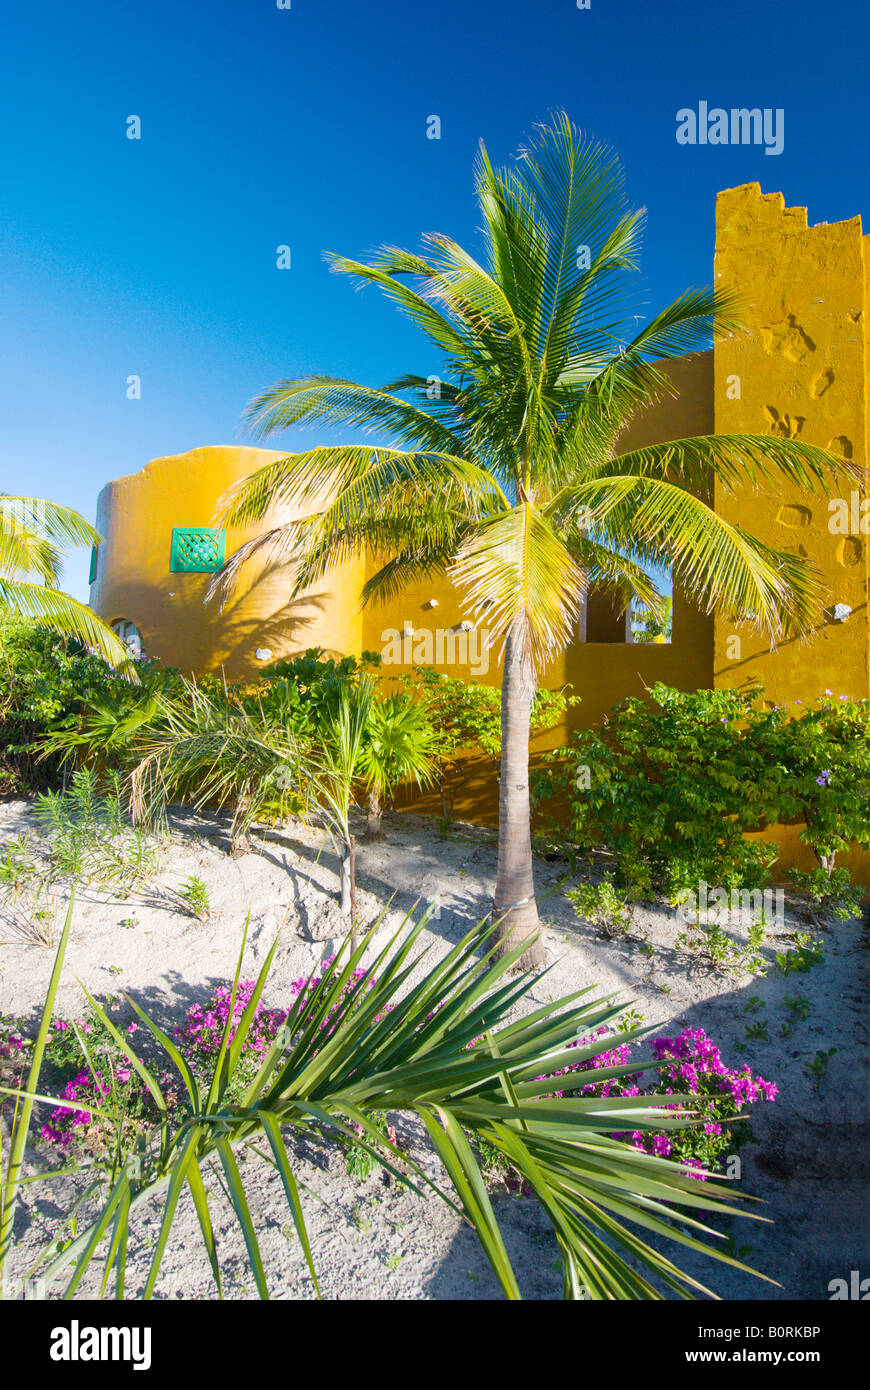 Tropical vegetation at the Half Moon Cay Welcome Center Bahamas Stock Photo